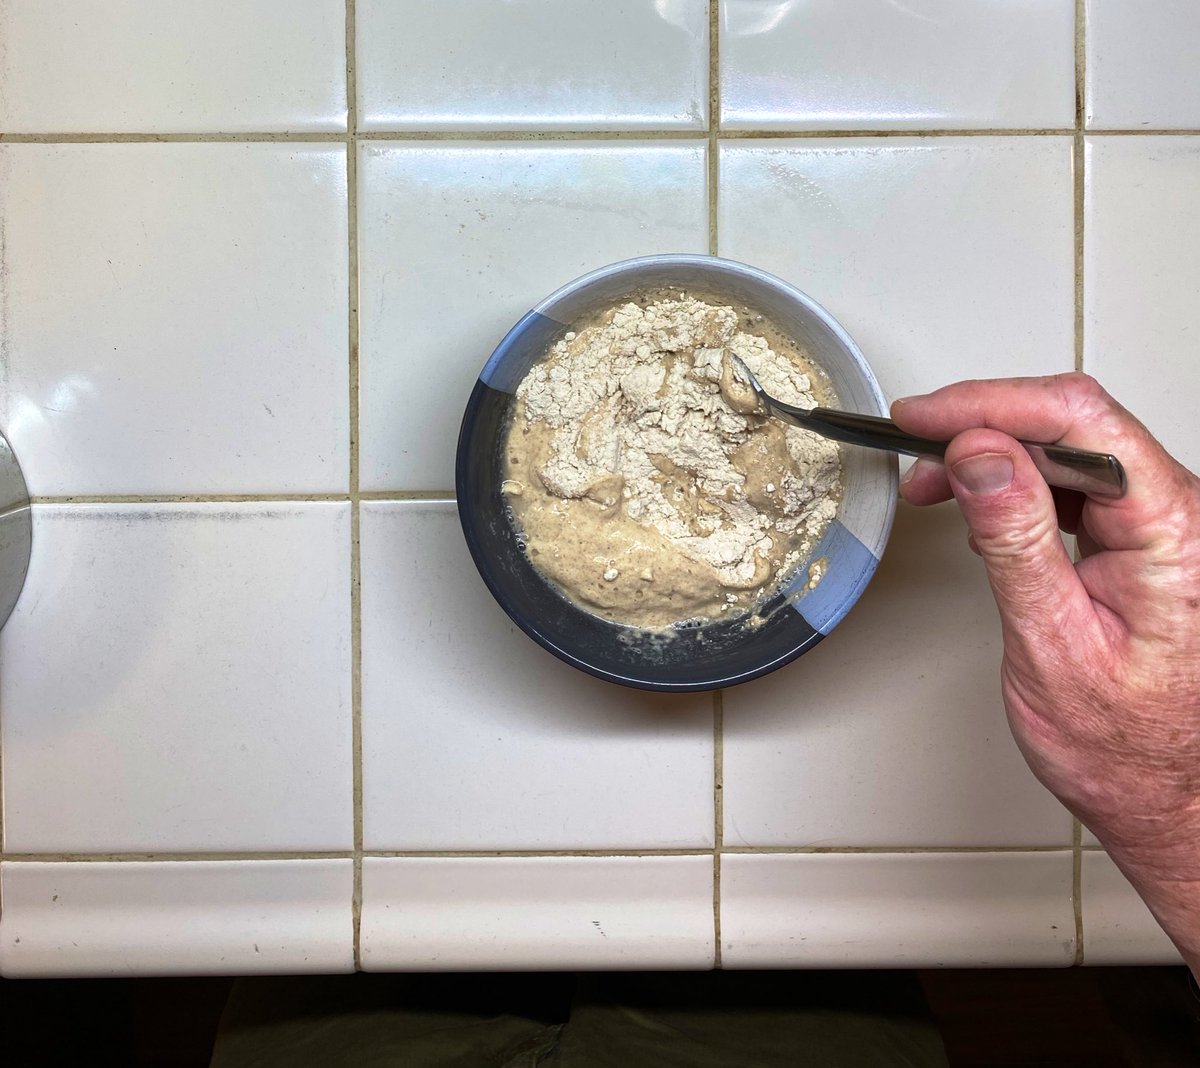 Add some water, stir and adjust until it has the consistency of a nice tile grout. If you’re not into tile installation, make it like a nice cottage cheese. If you don’t know what that is, I mean, who doesn’t know what cottage cheese is like. Come on.